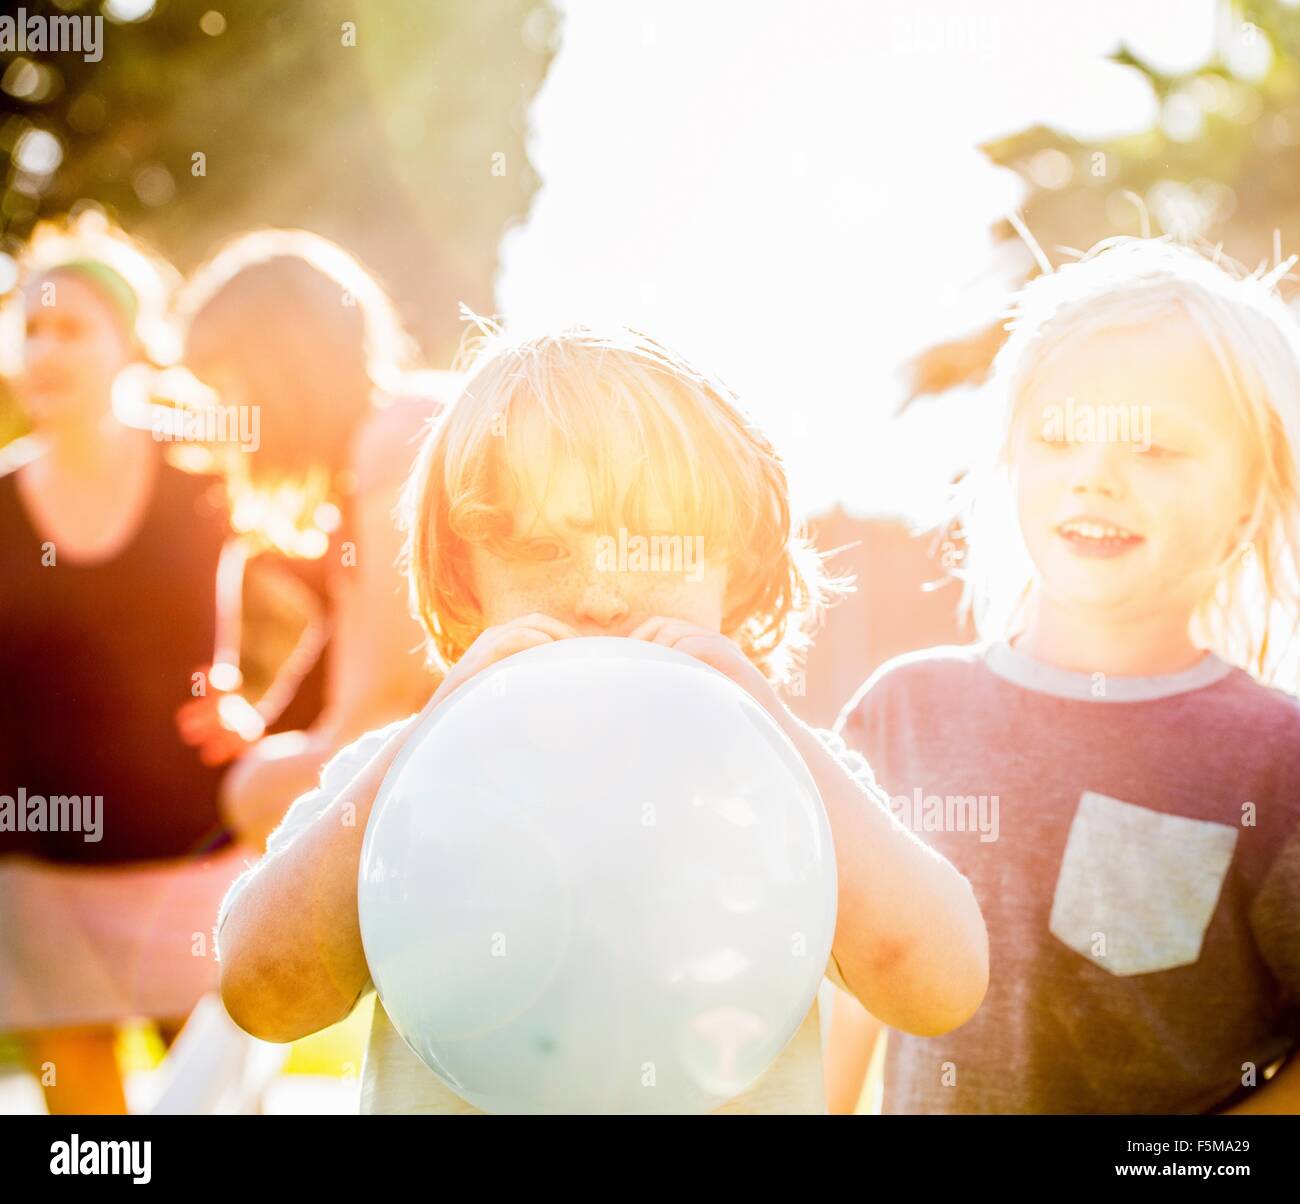 Young boy blowing up balloon in garden Stock Photo